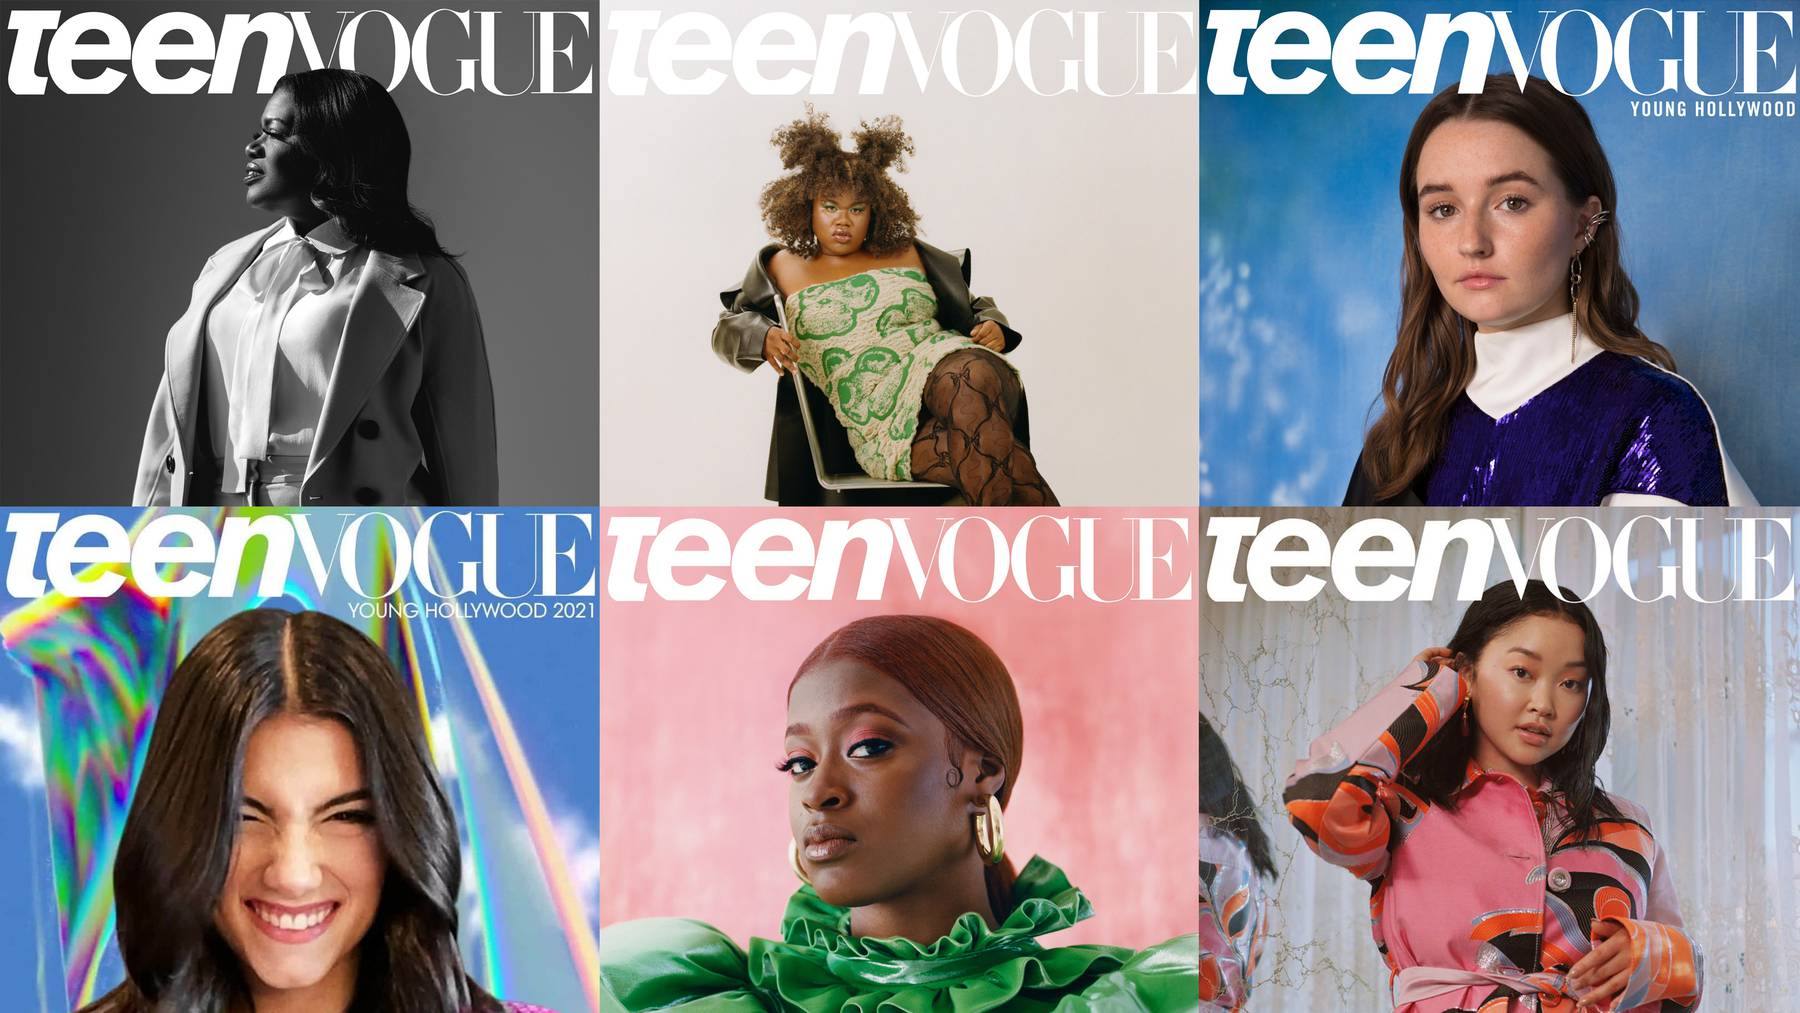 Recent Teen Vogue digital covers. Courtesy